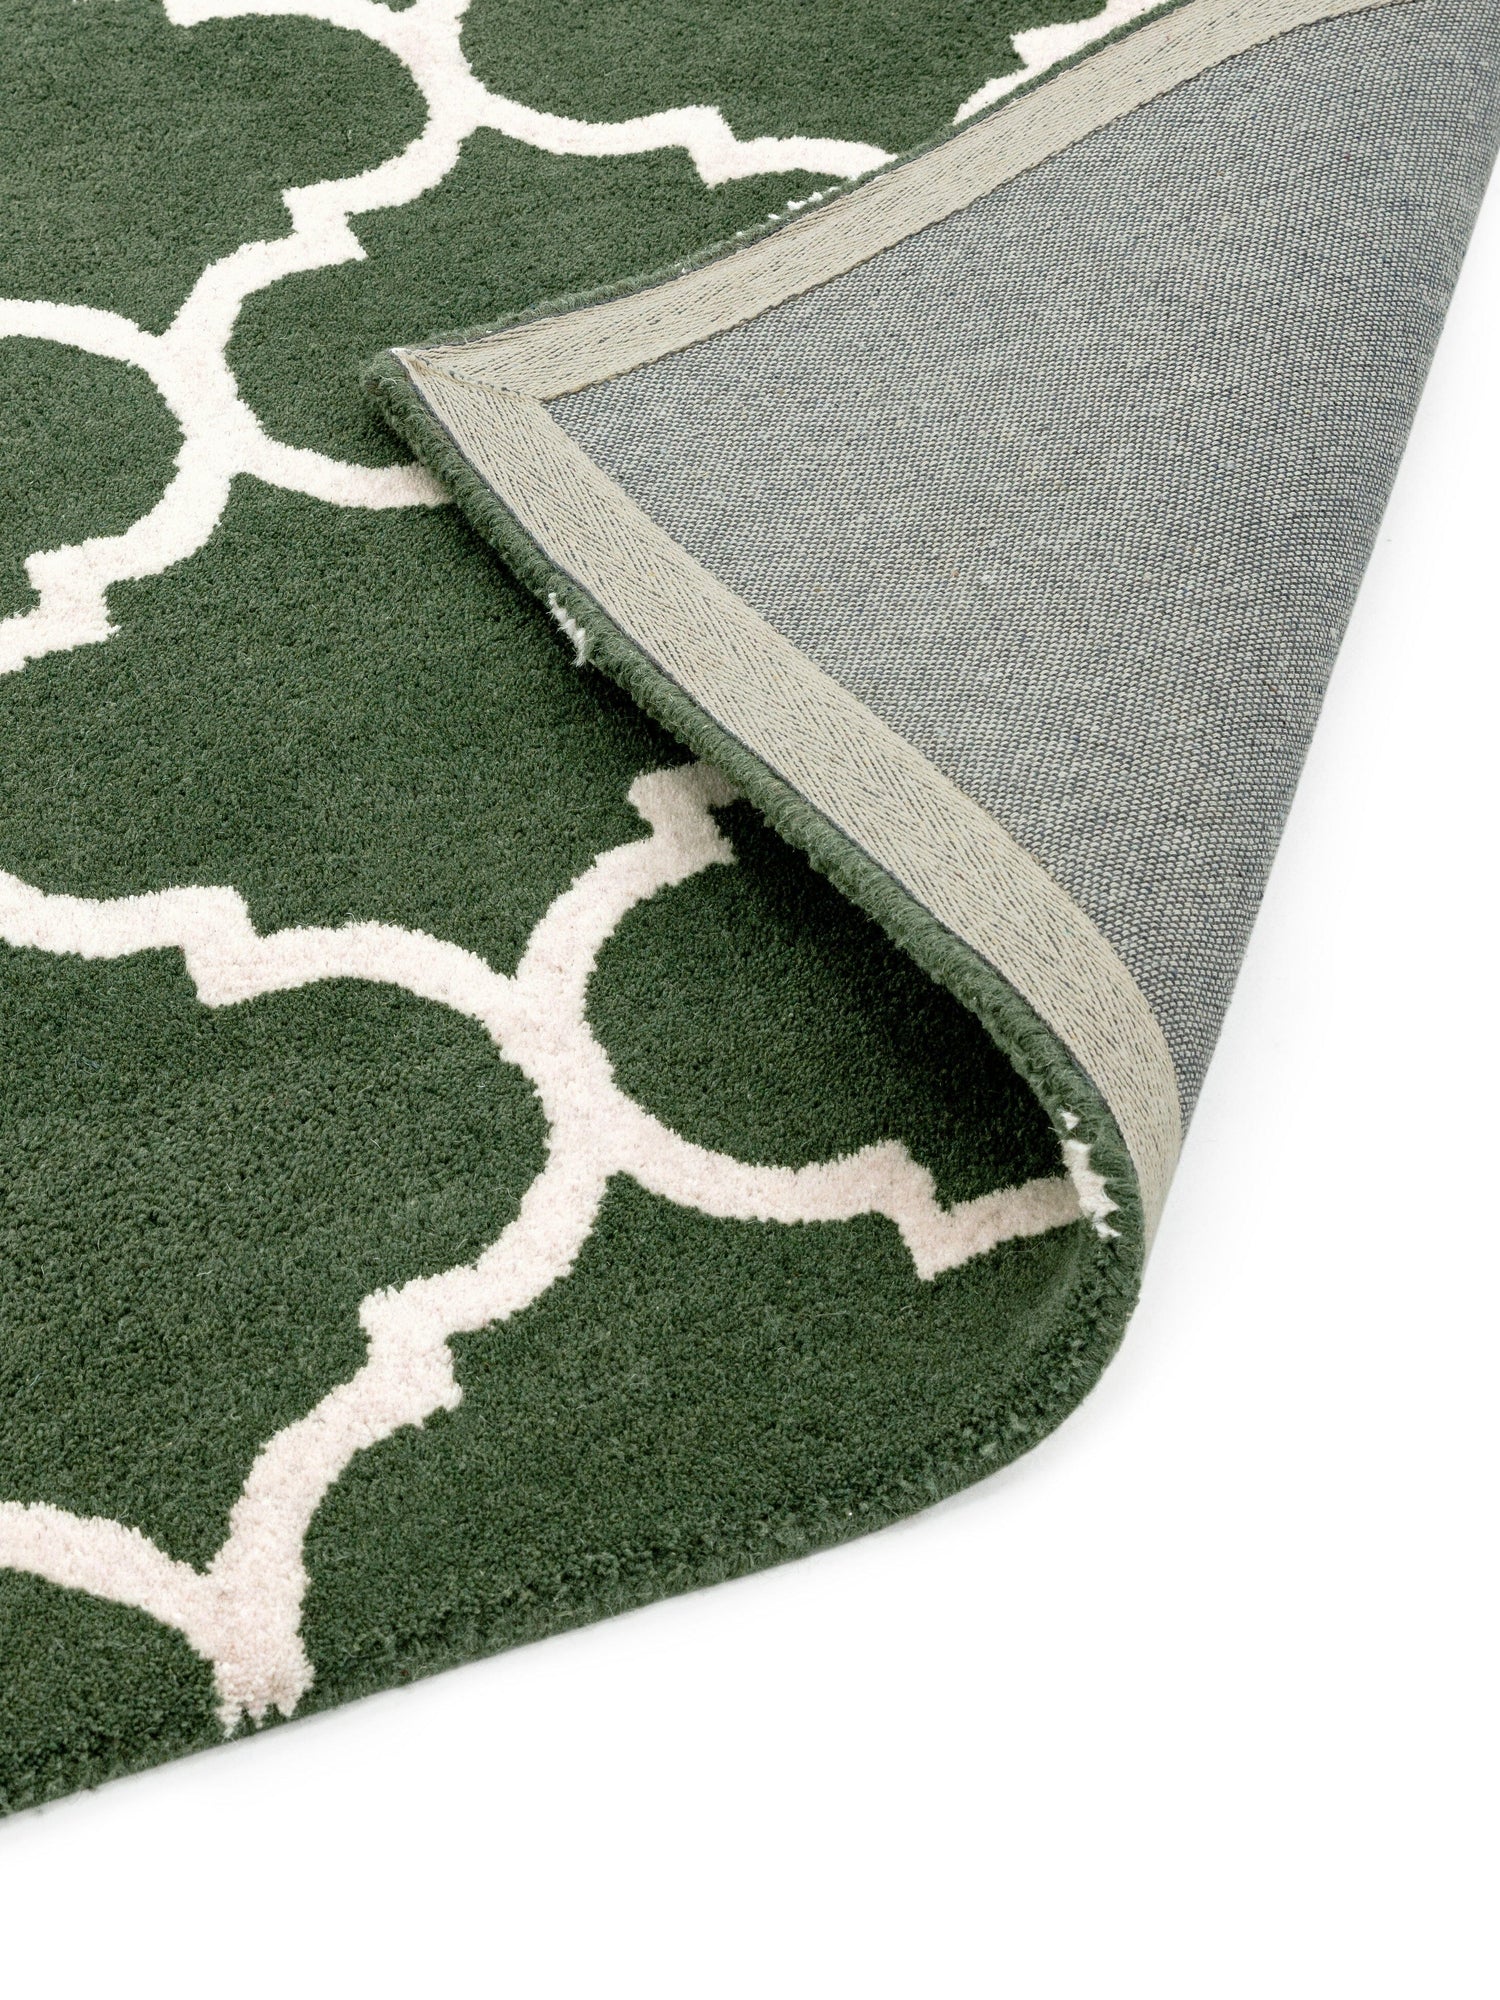  Asiatic Carpets-Asiatic Carpets Albany Handtufted Rug Ogee Green - 120 x 170cm-Green 869 